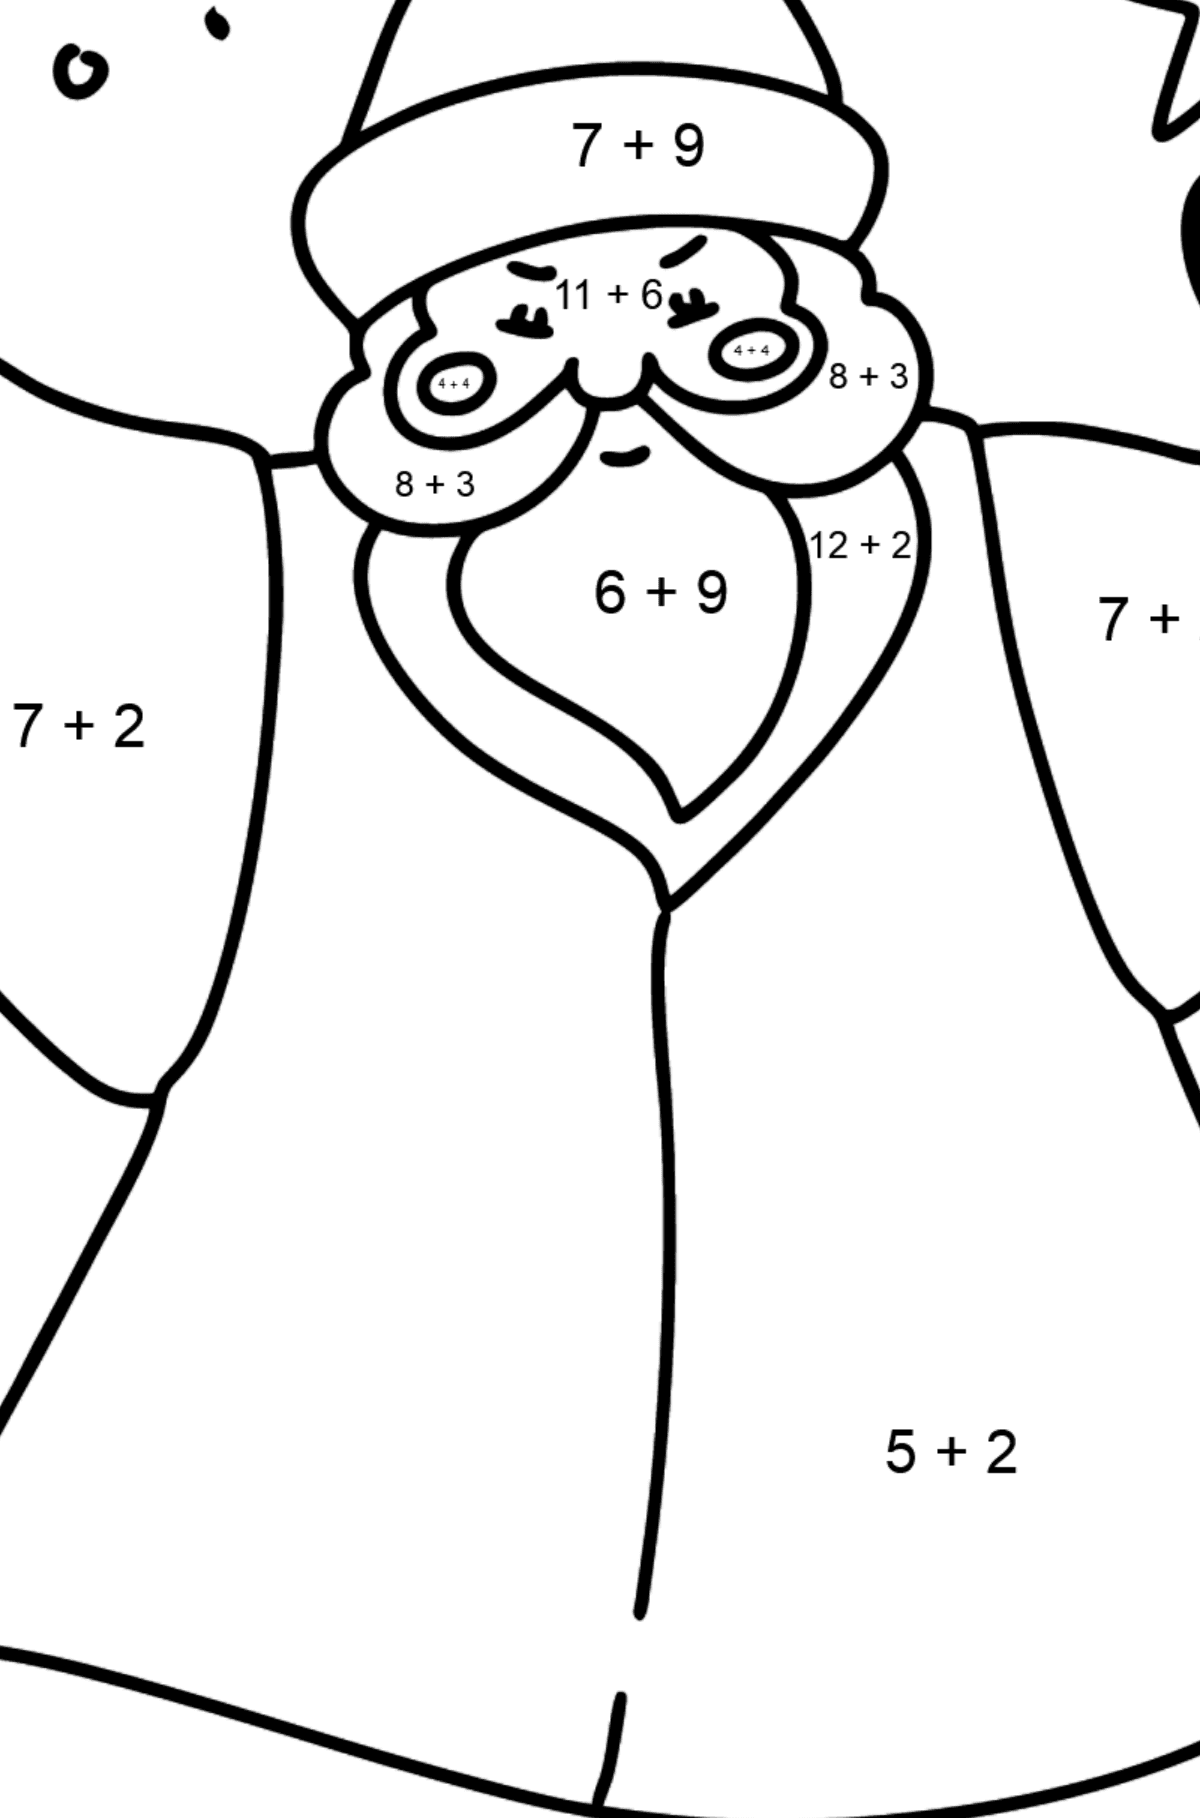 Father Frost coloring page - Math Coloring - Addition for Kids